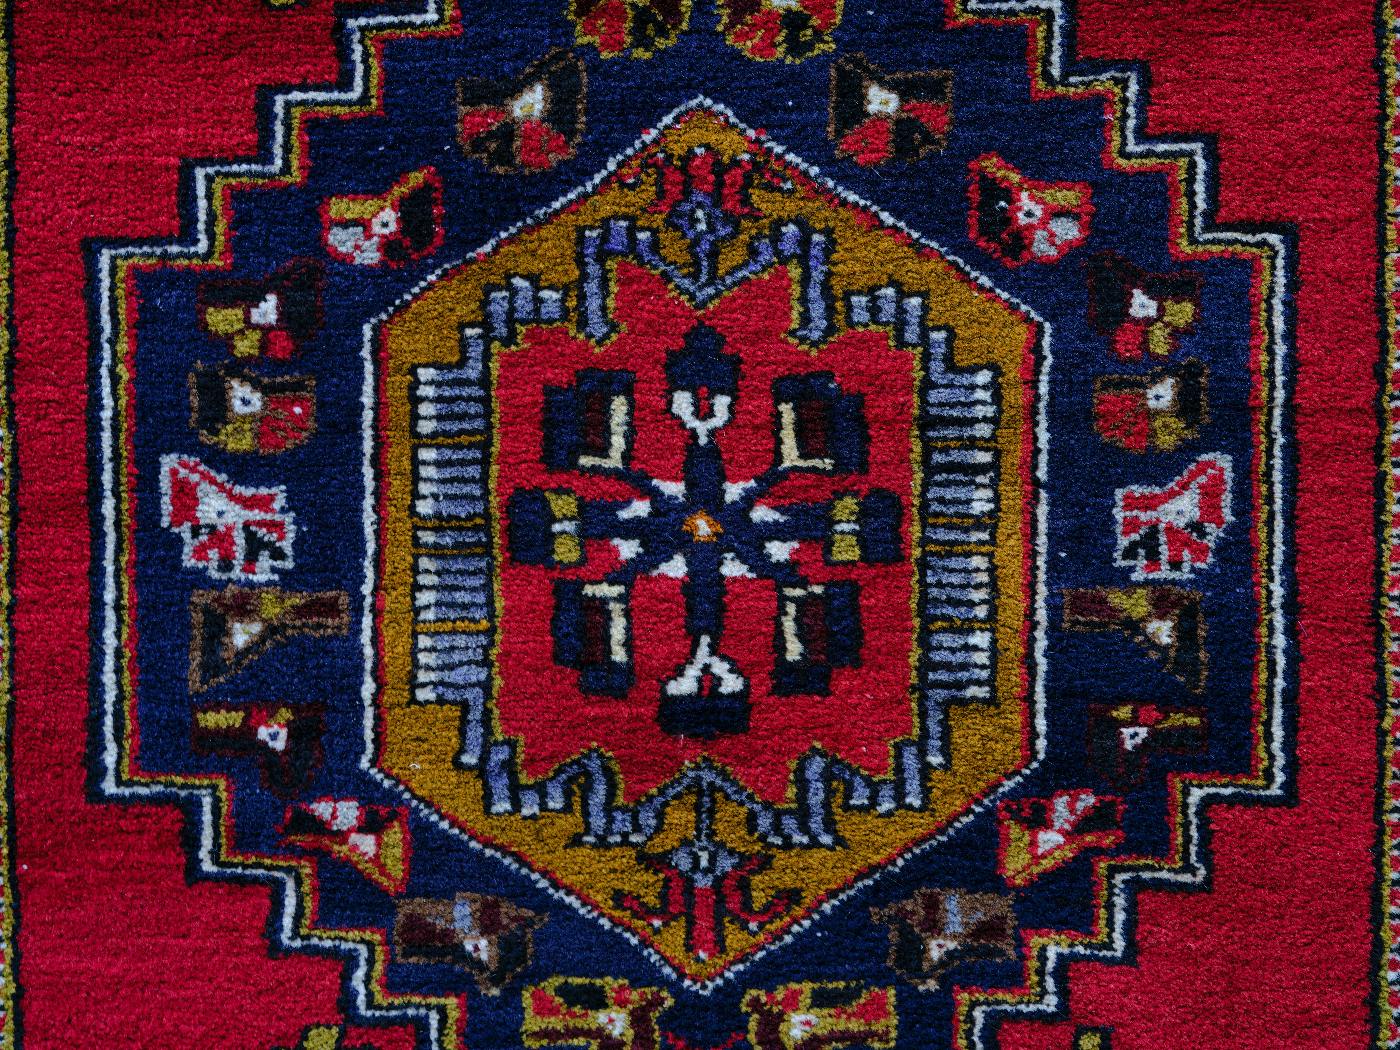 a colorful woven rug with a center design